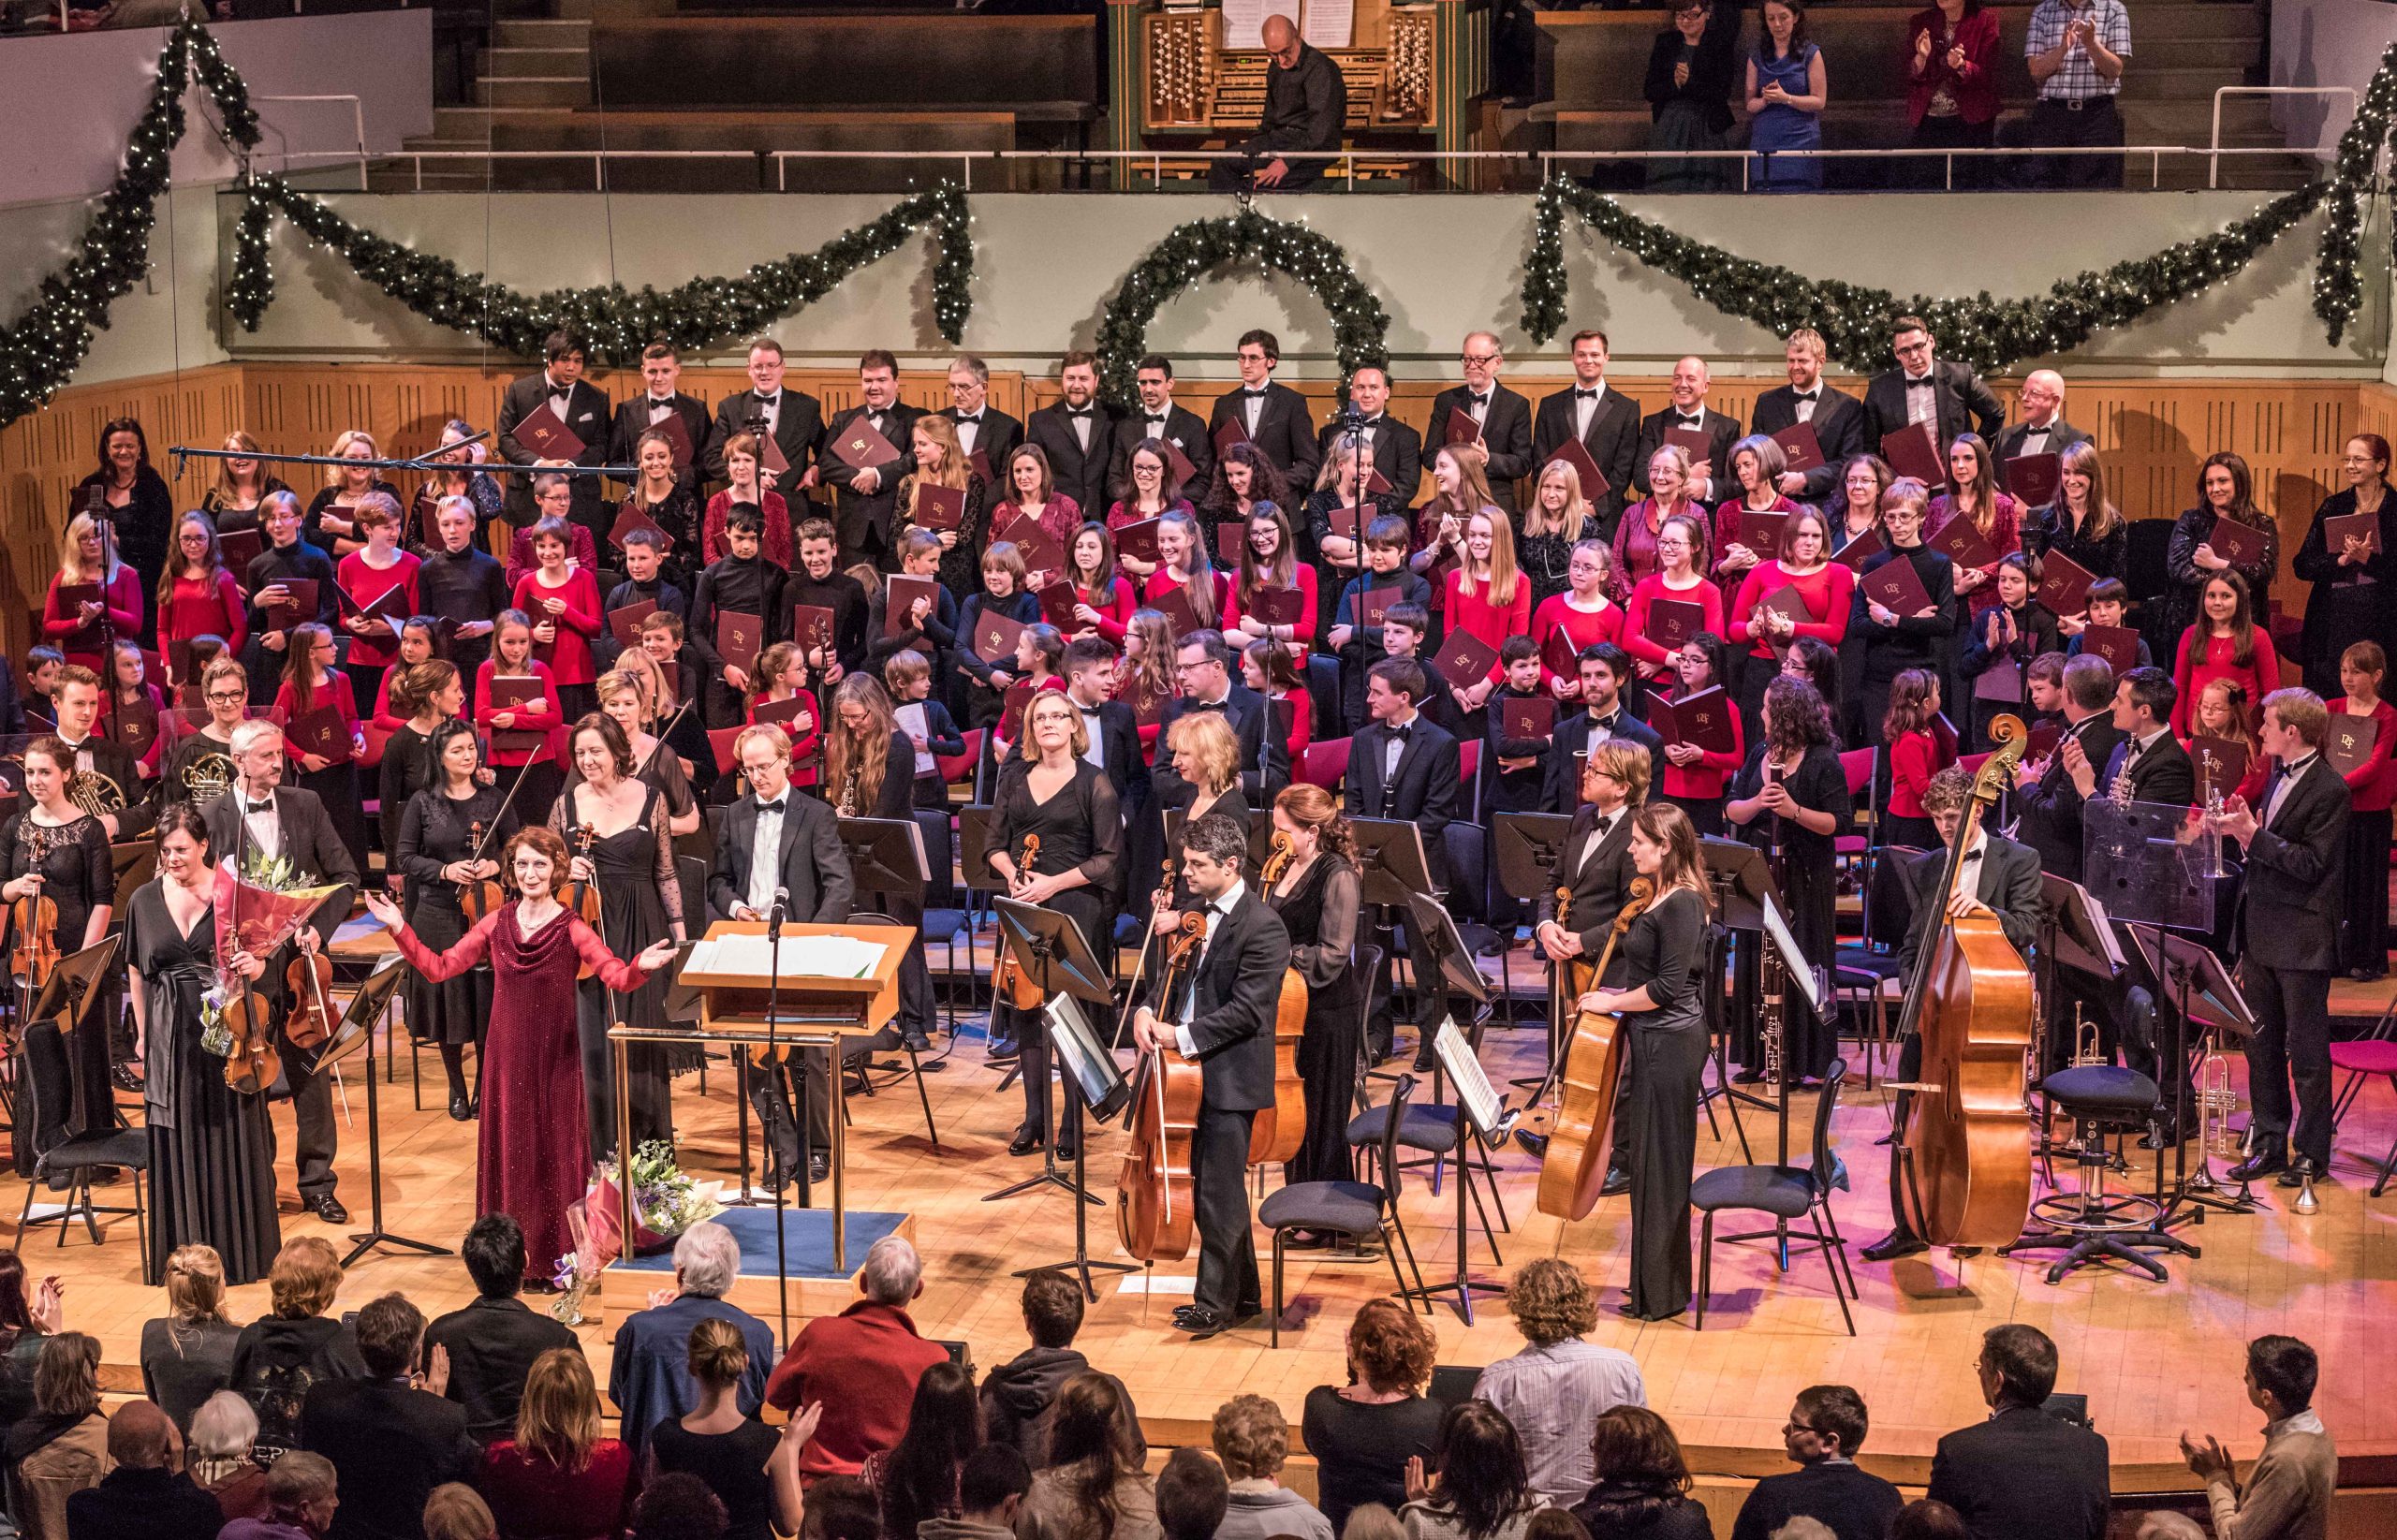 The Great Christmas Concert 2015